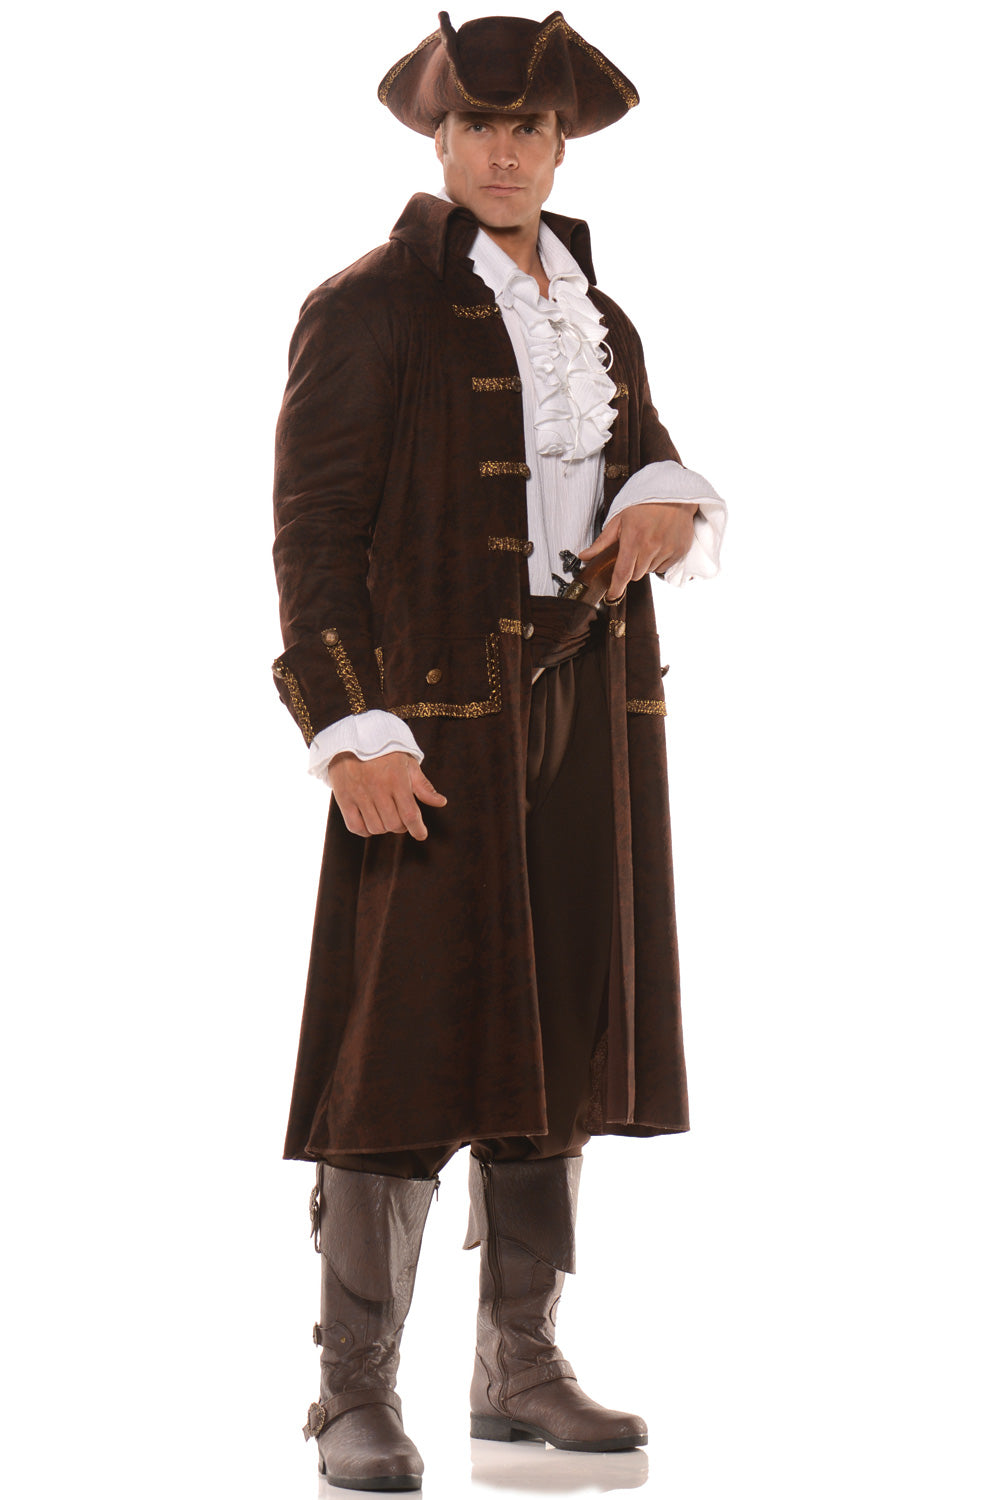 Captain Barret Pirate Costme - Adult